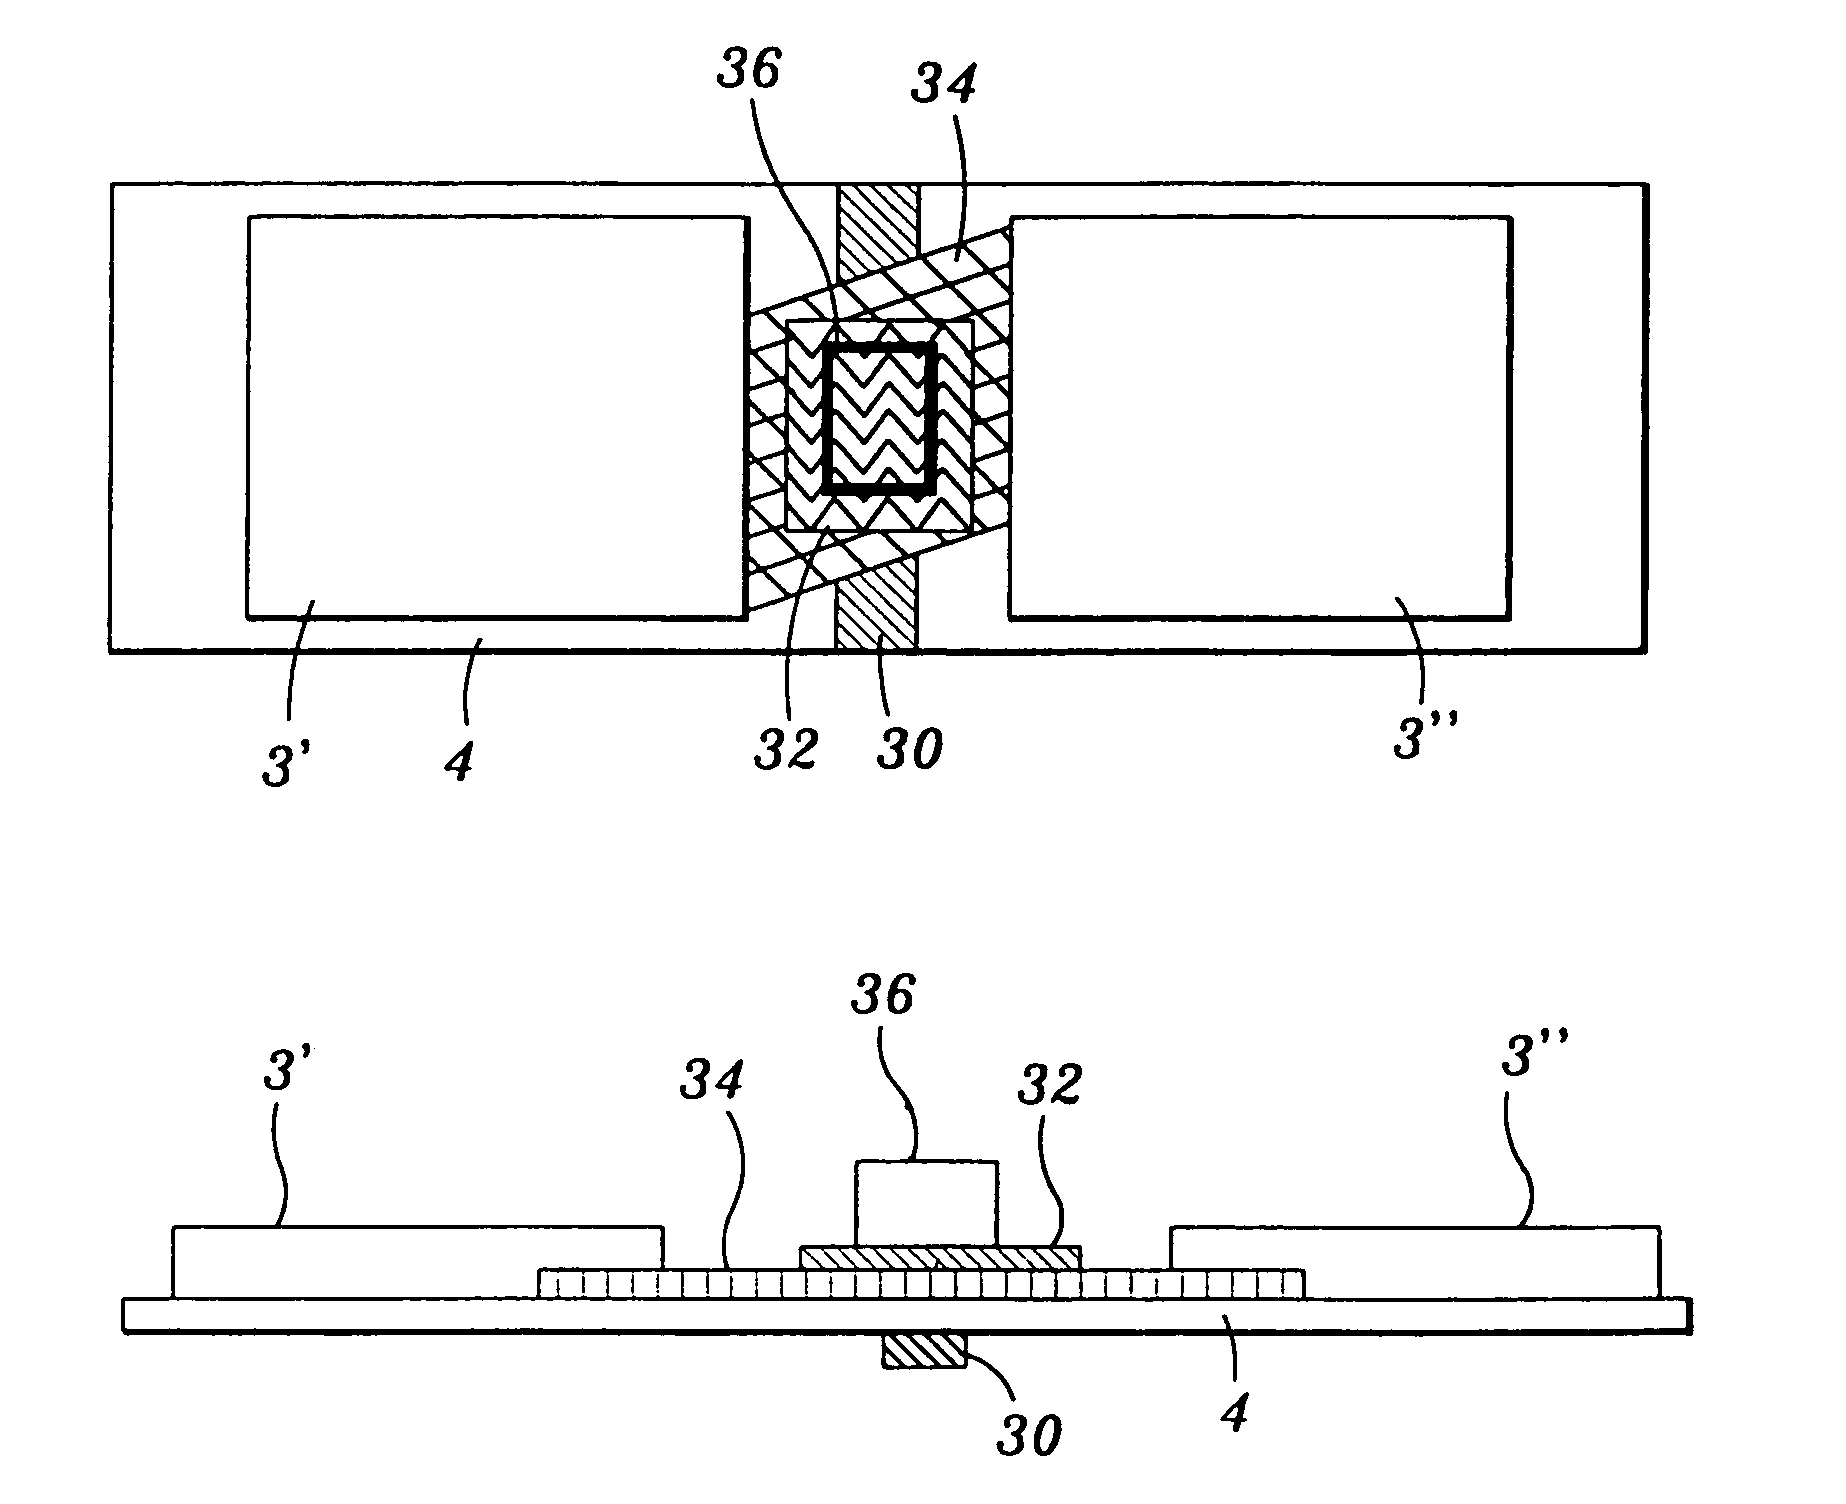 Systems and methods for performing magnetic chromatography assays